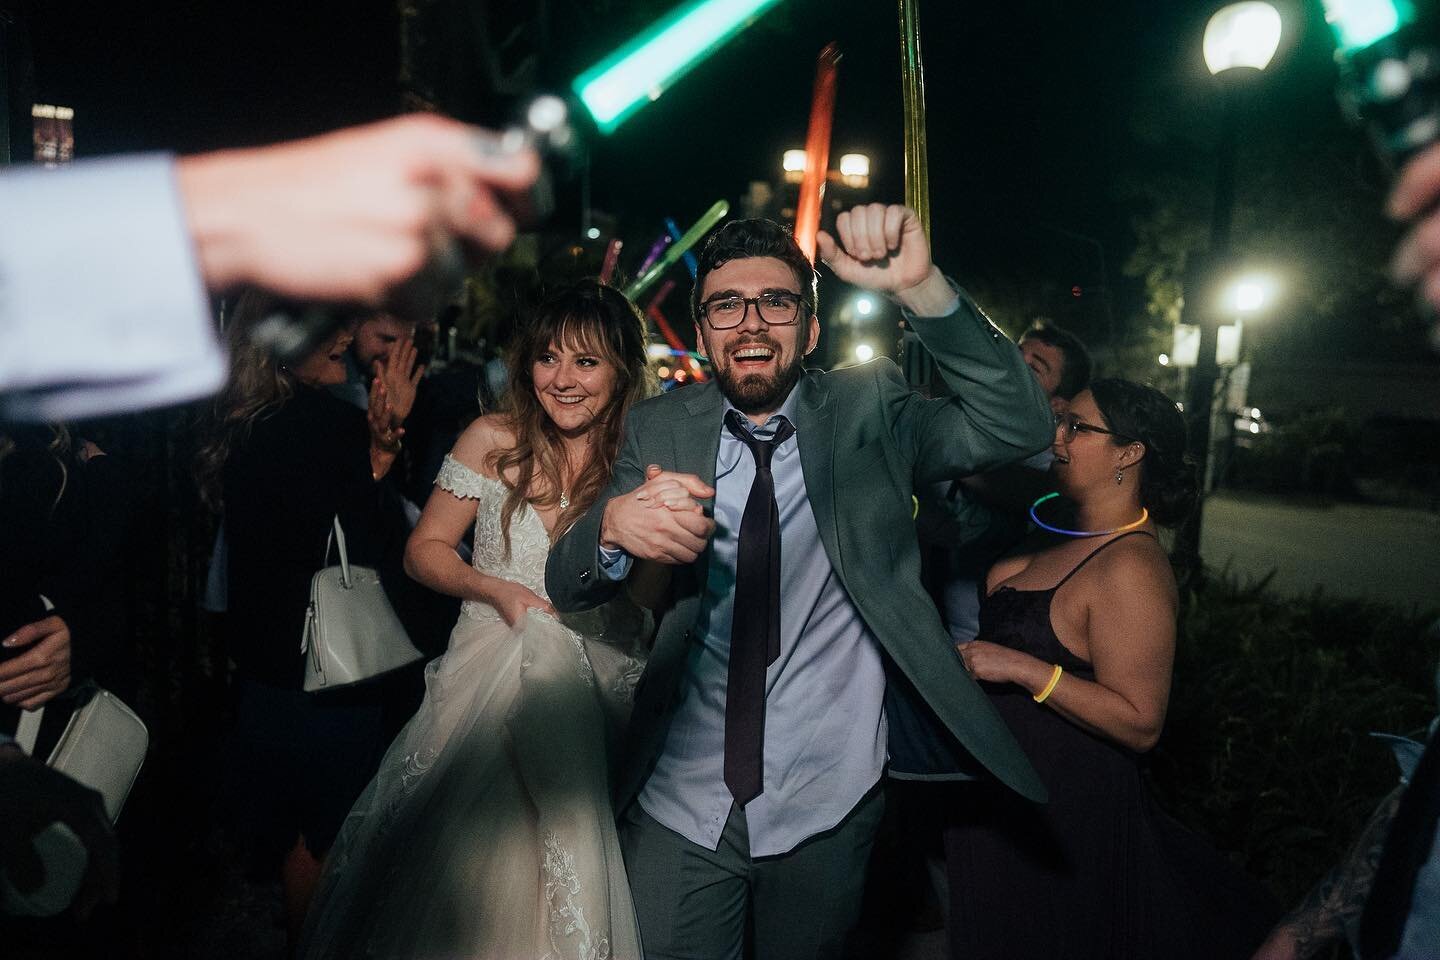 May the 4th be with you! So many great Star Wars details from Cara &amp; Tyler&rsquo;s wedding, but the light saber send off has got to be my fave! 

Planner: @taylored.affairs 
HMUA: @freshsarasota Tammy 
Florals: @sueellensfloralboutique 
Venue: @s